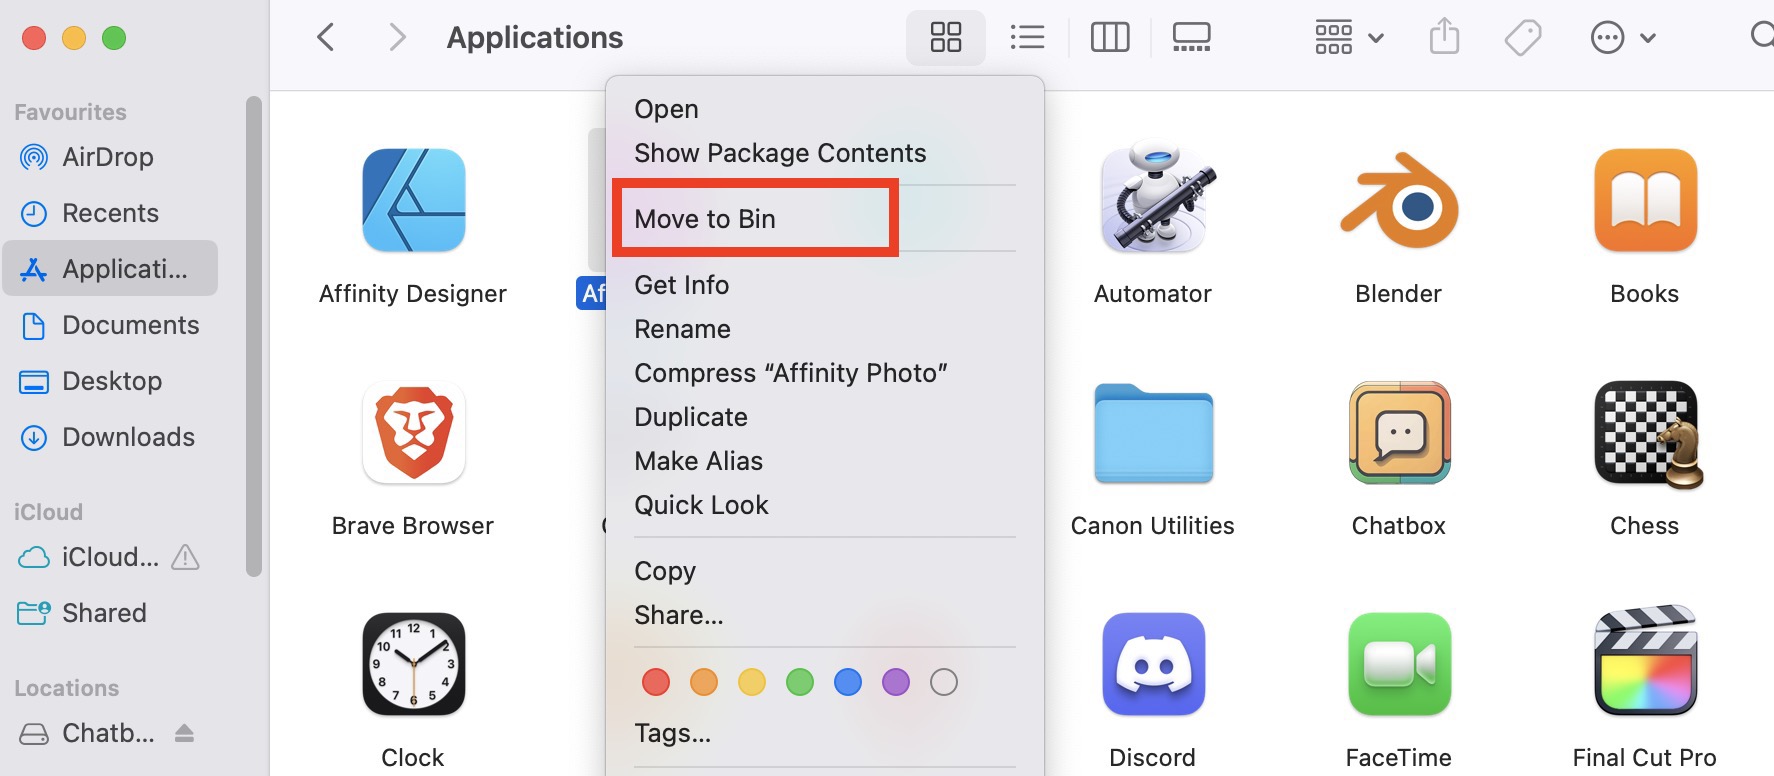 How to delete apps on MacBook